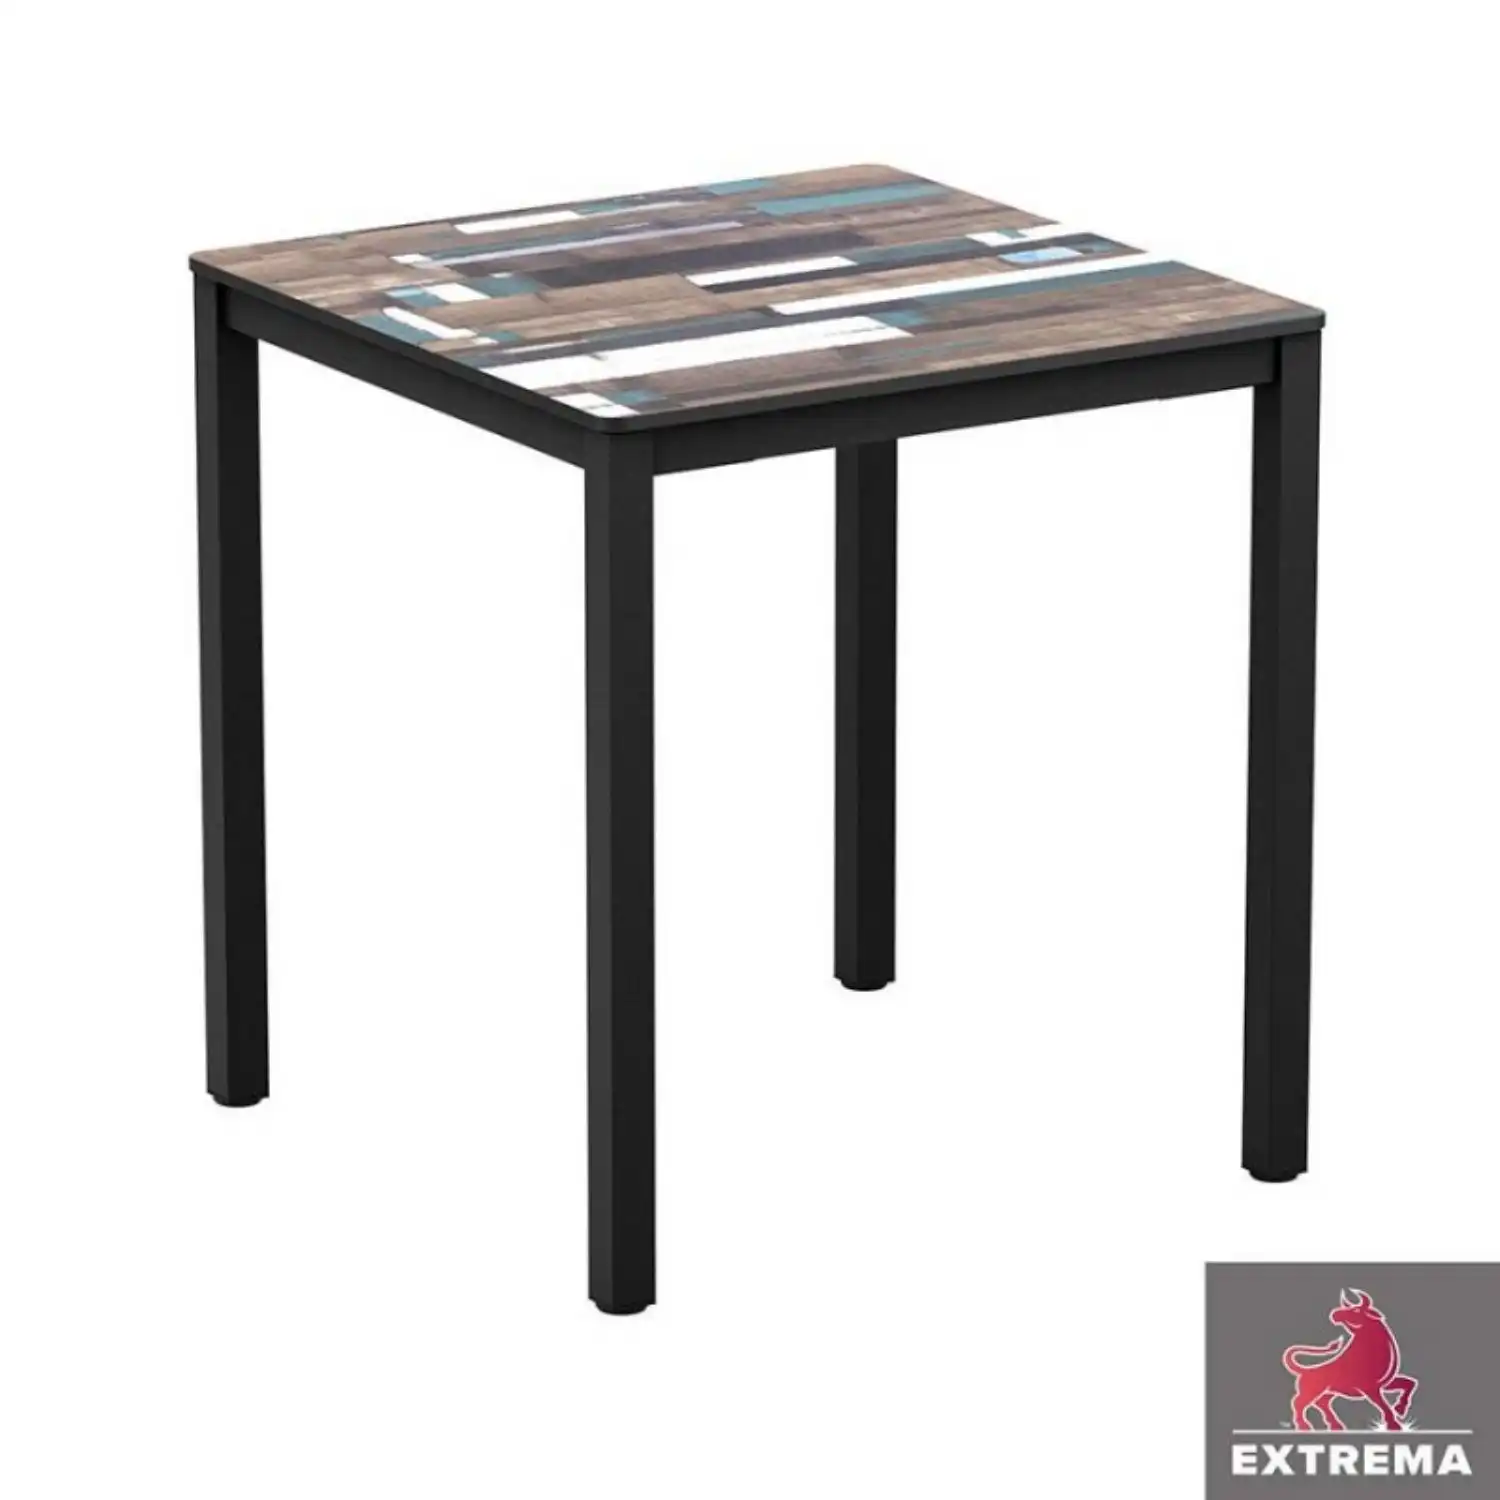 Exeter Contract 60cm Square Dining Table